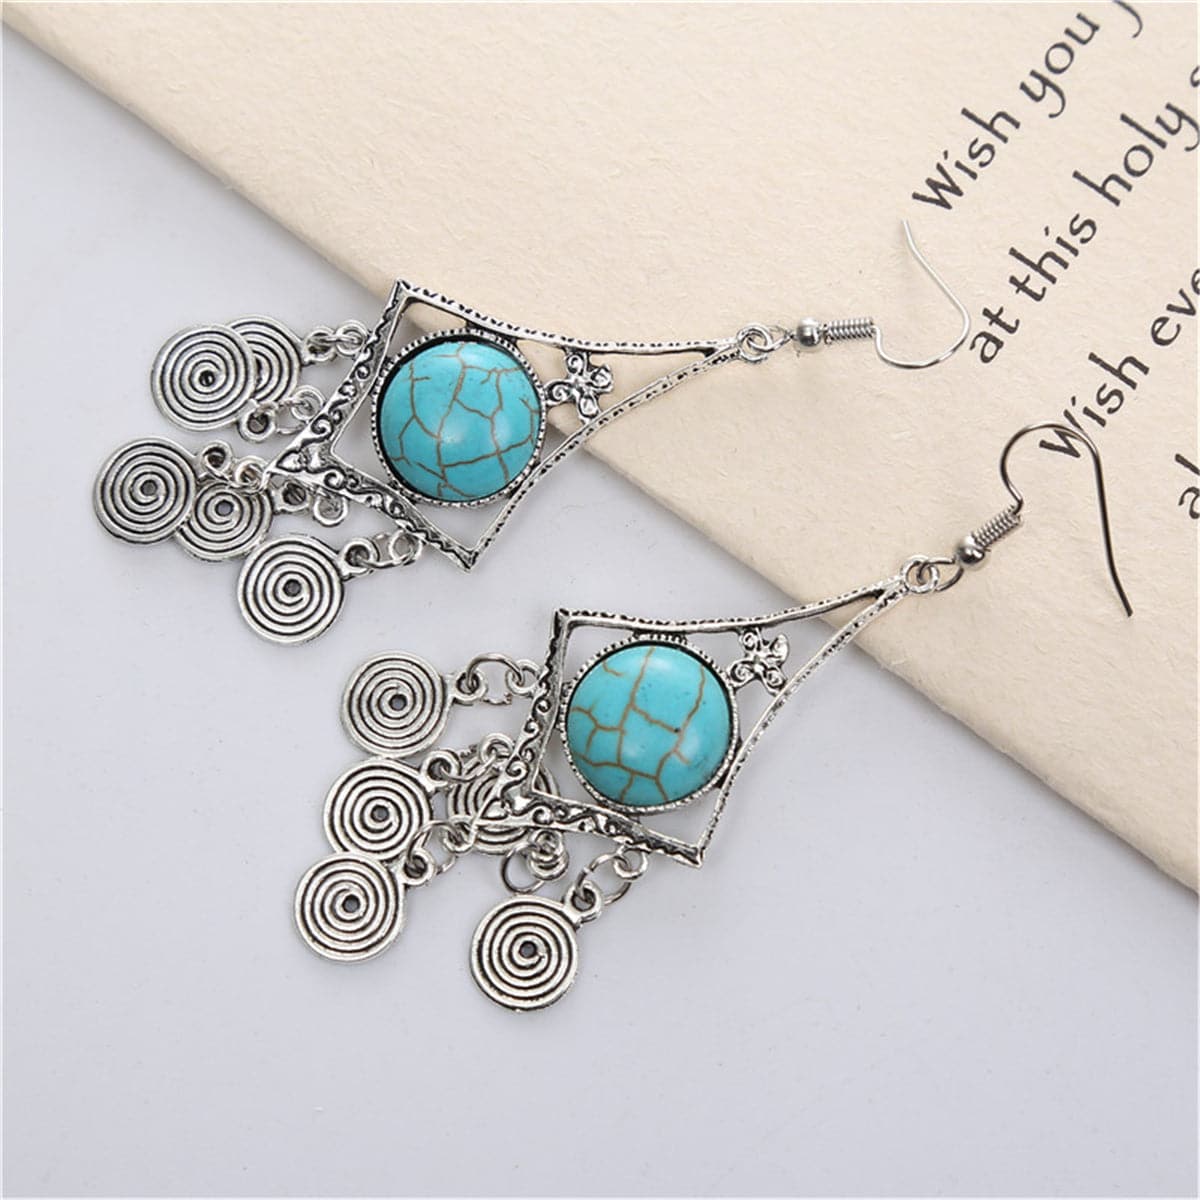 Turquoise & Silver-Plated Vortex Drop Earrings